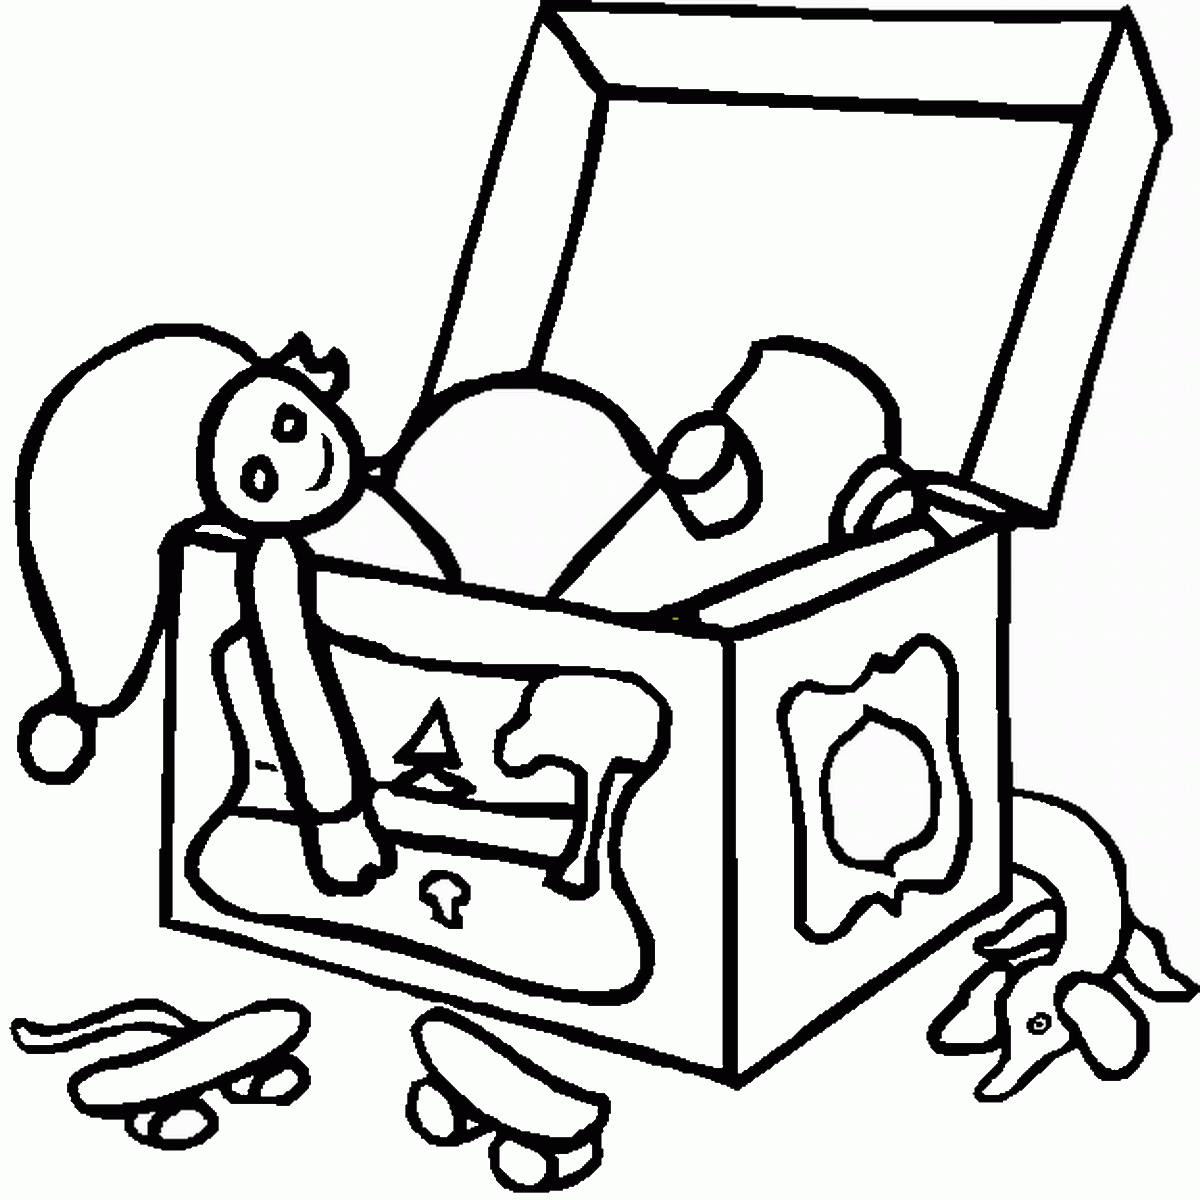 toys coloring pages toys coloring page free printable coloring pages toys coloring pages 